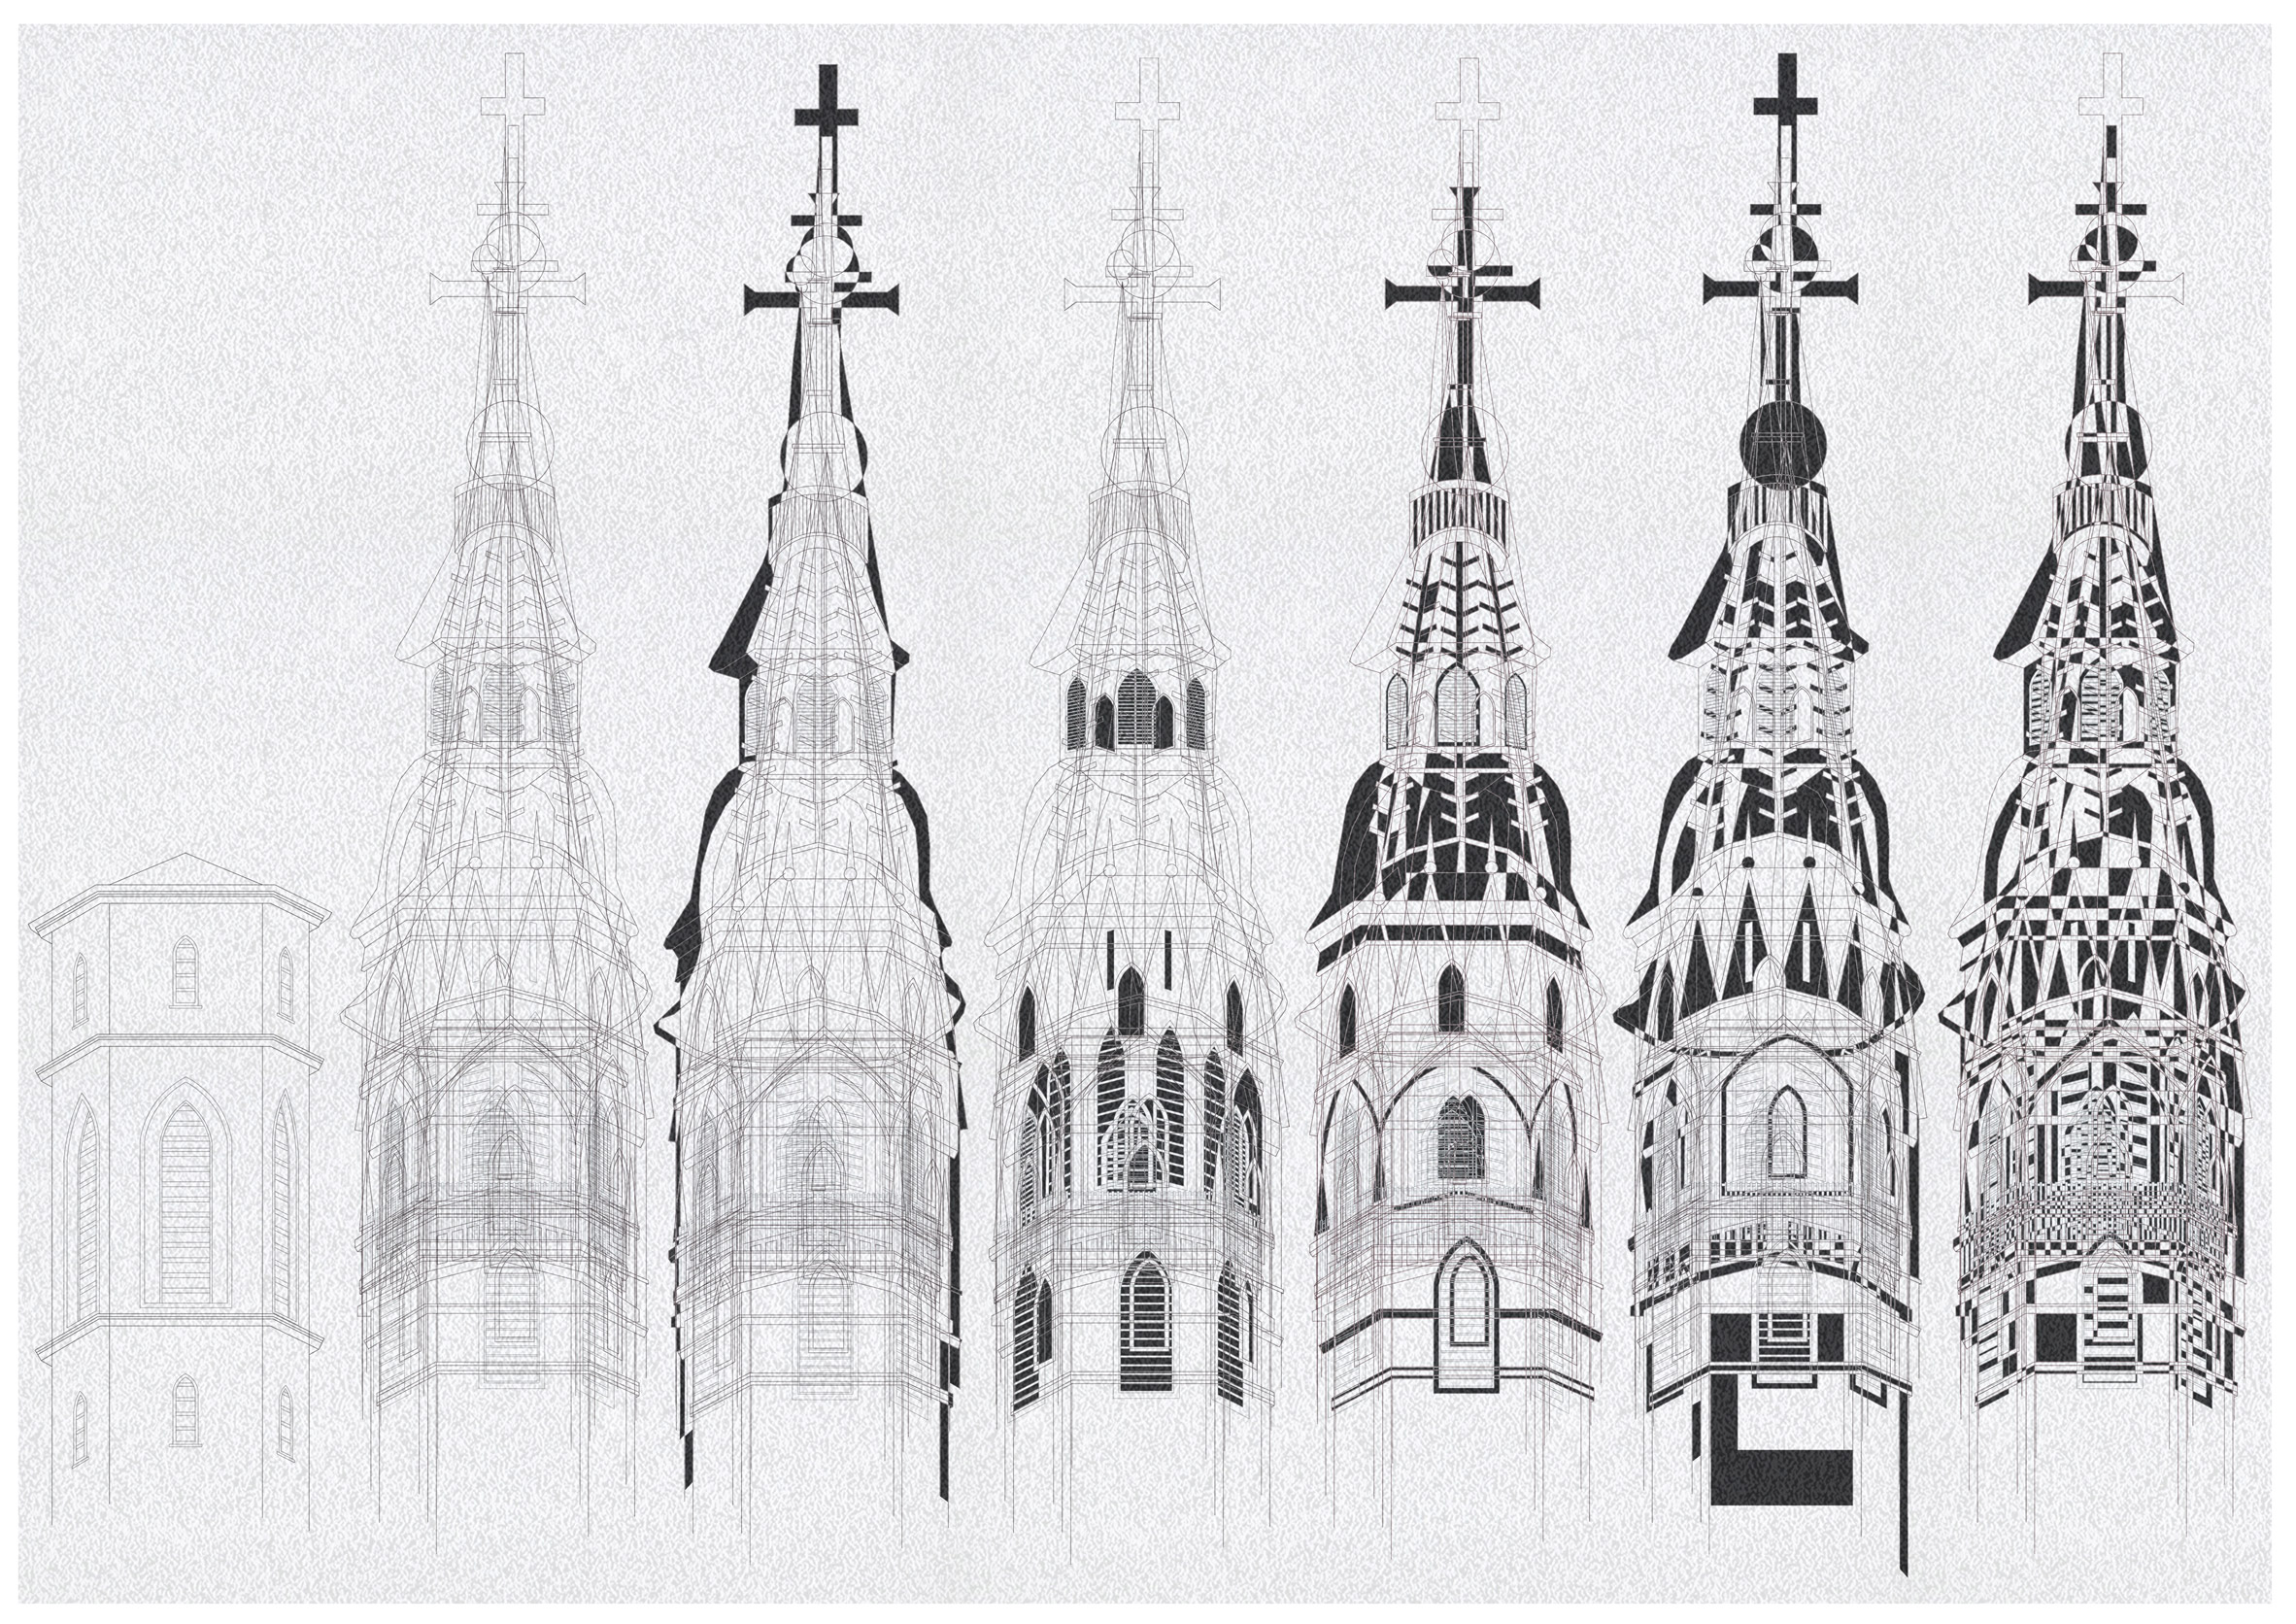 Line drawing of church and building spires and towers in a row